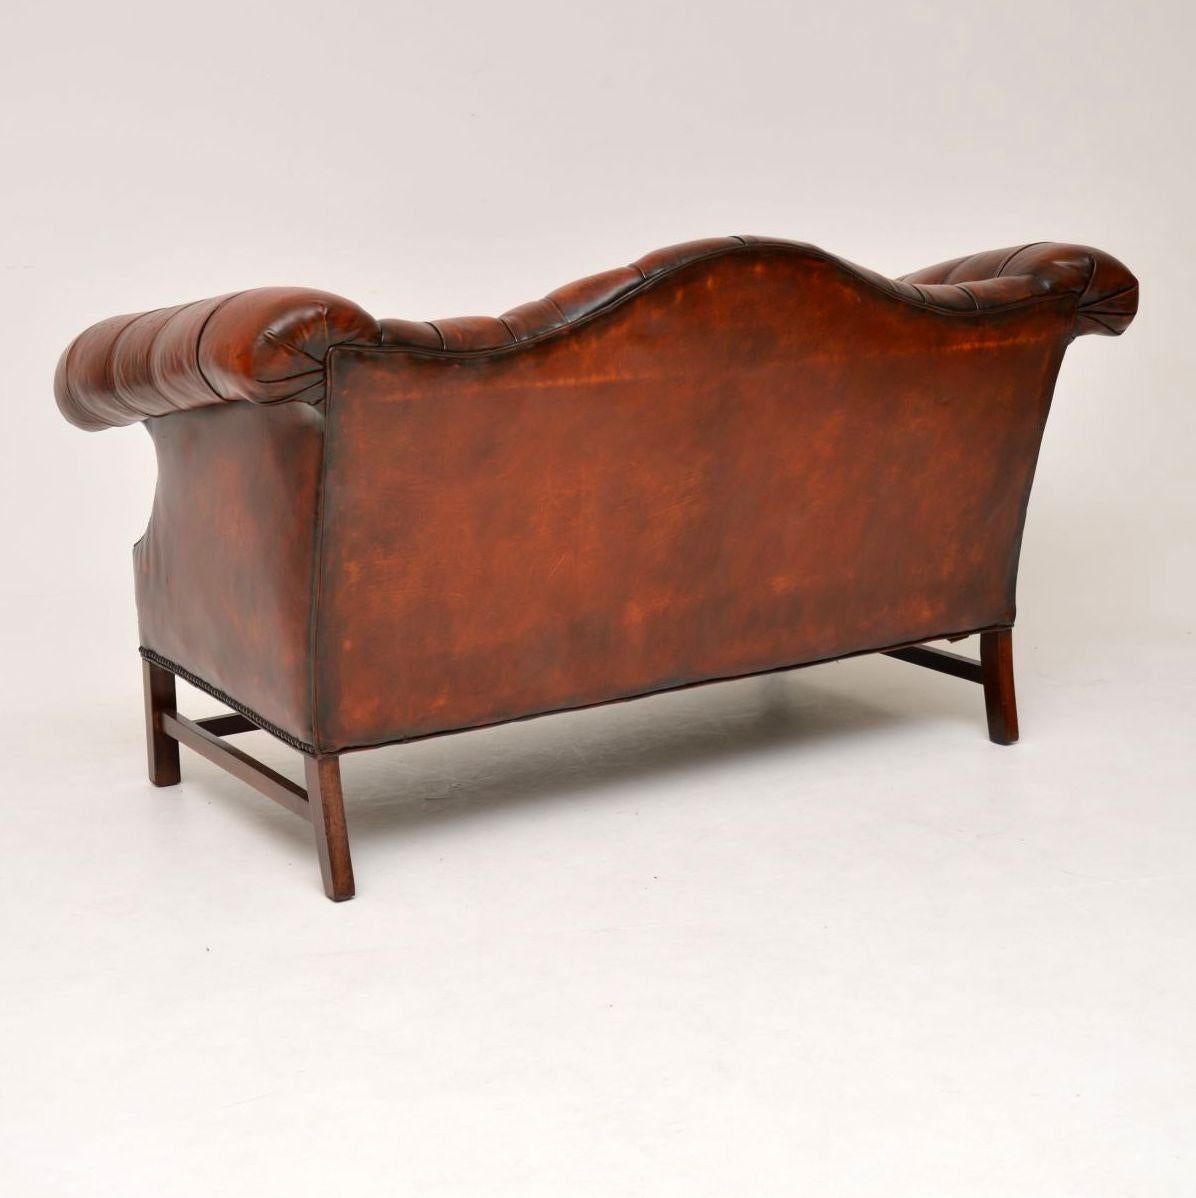 Hand-Crafted Antique Deep Buttoned Leather Hump Back Sofa